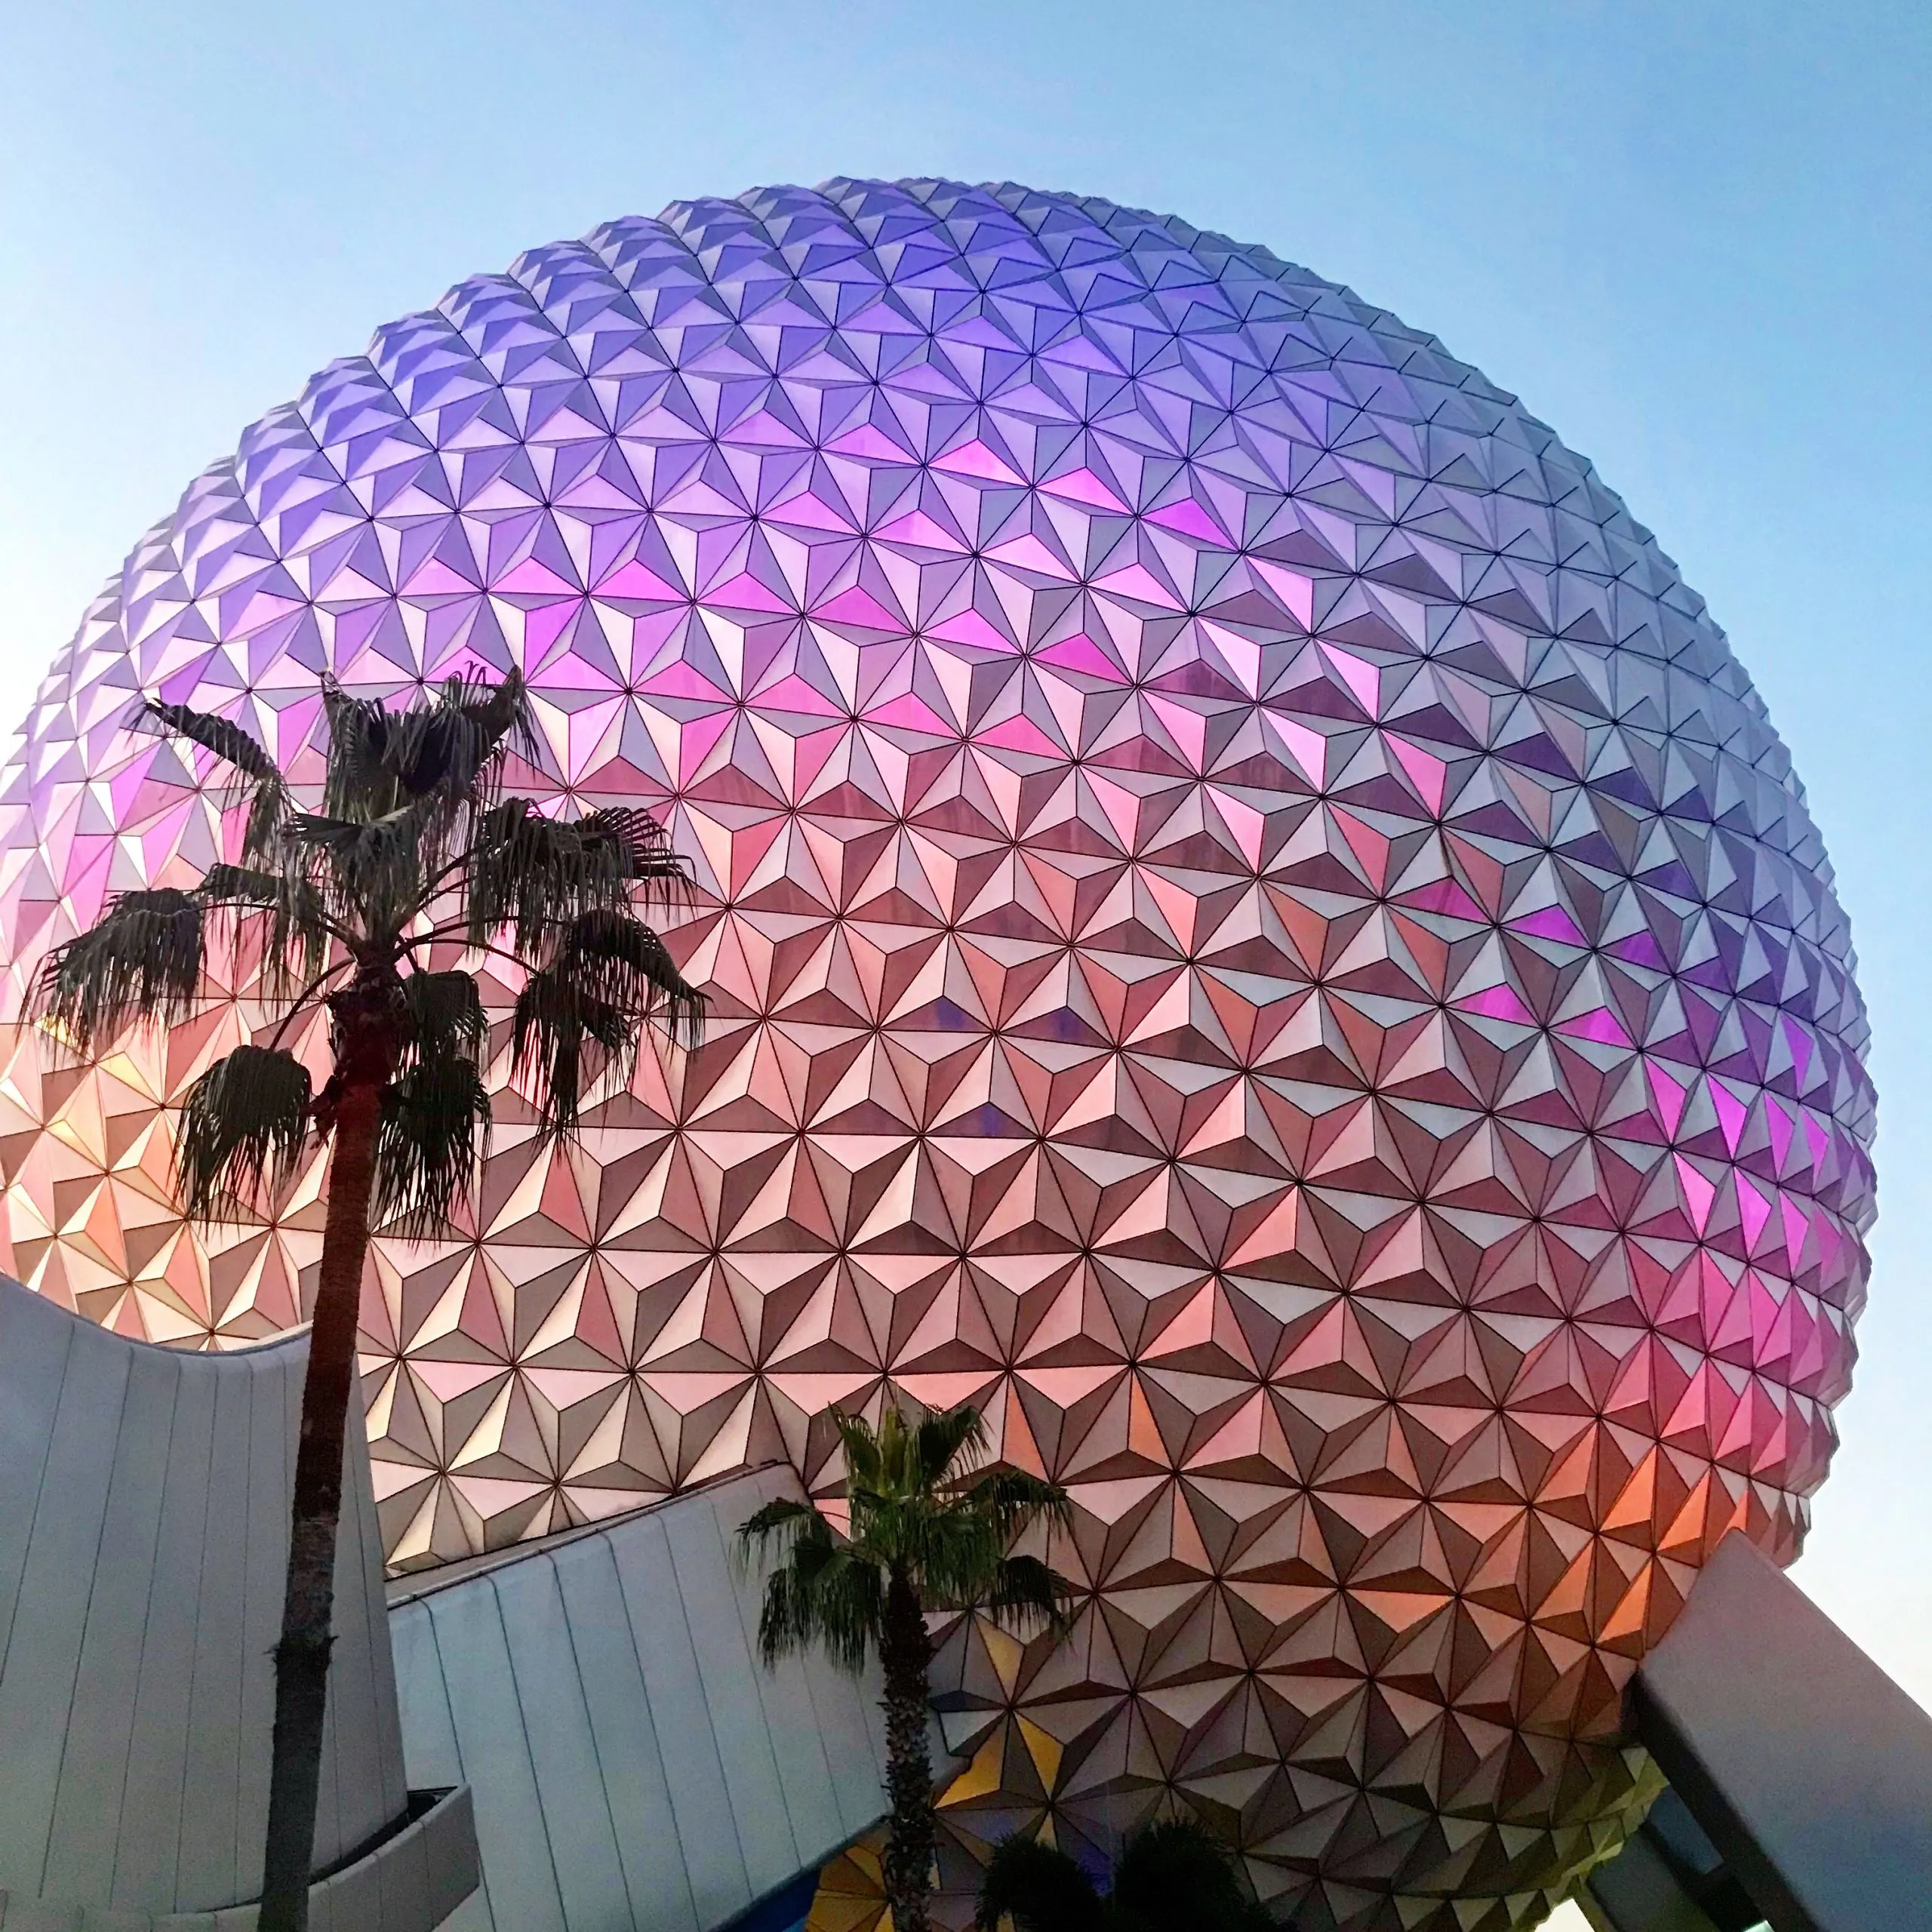 spaceship earth in epcot